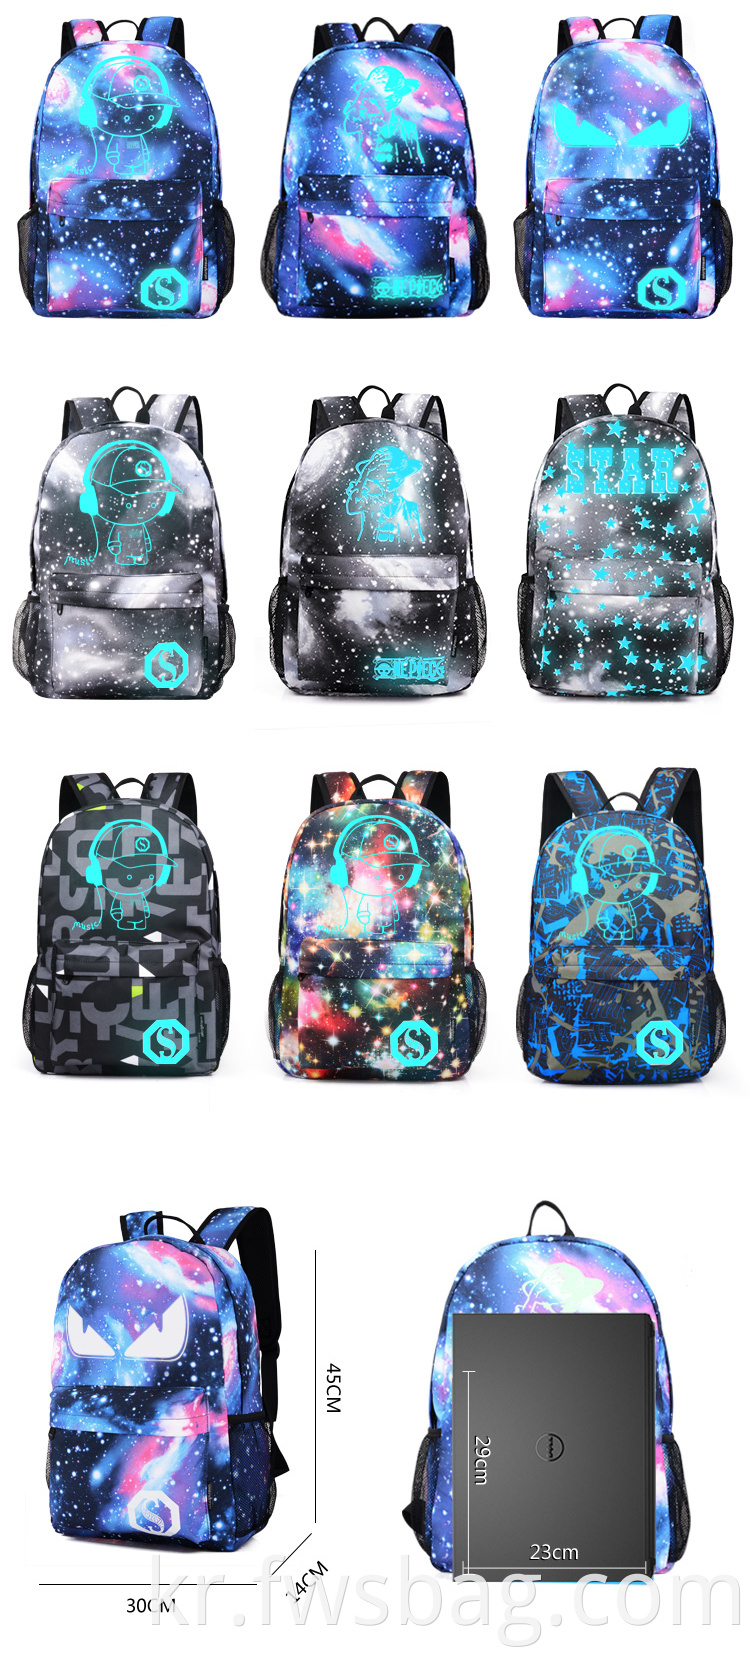 Hot Unisex Fashion Galaxy Anime Luminous Backpack Outdoor Daypack School Backpack USB Charing Port